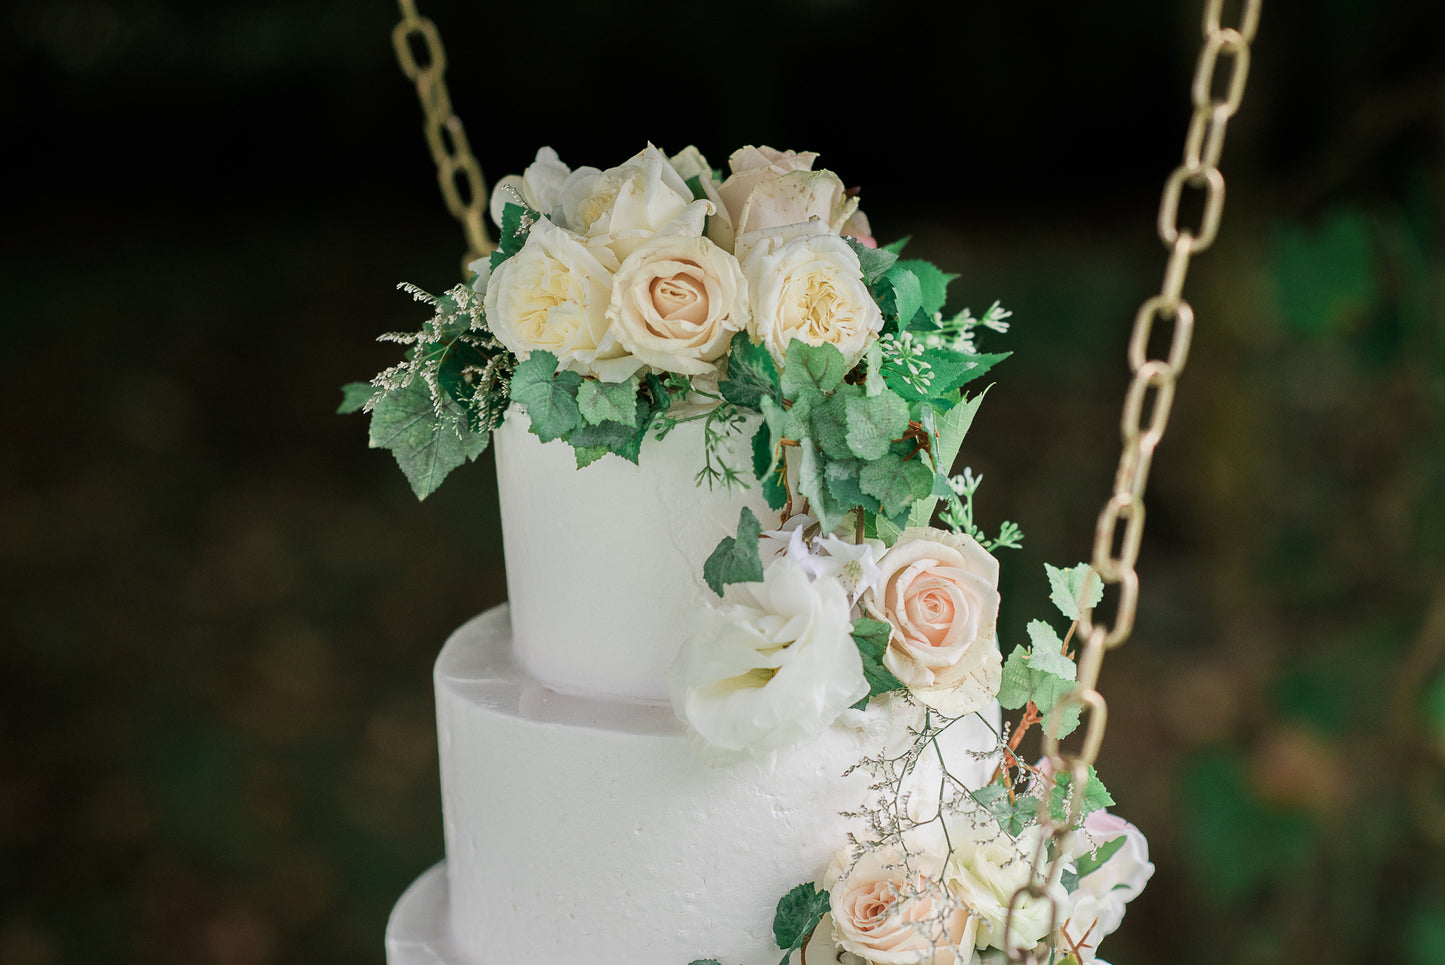 Hanging 4 Tier Buttercream with Pastel Flowers